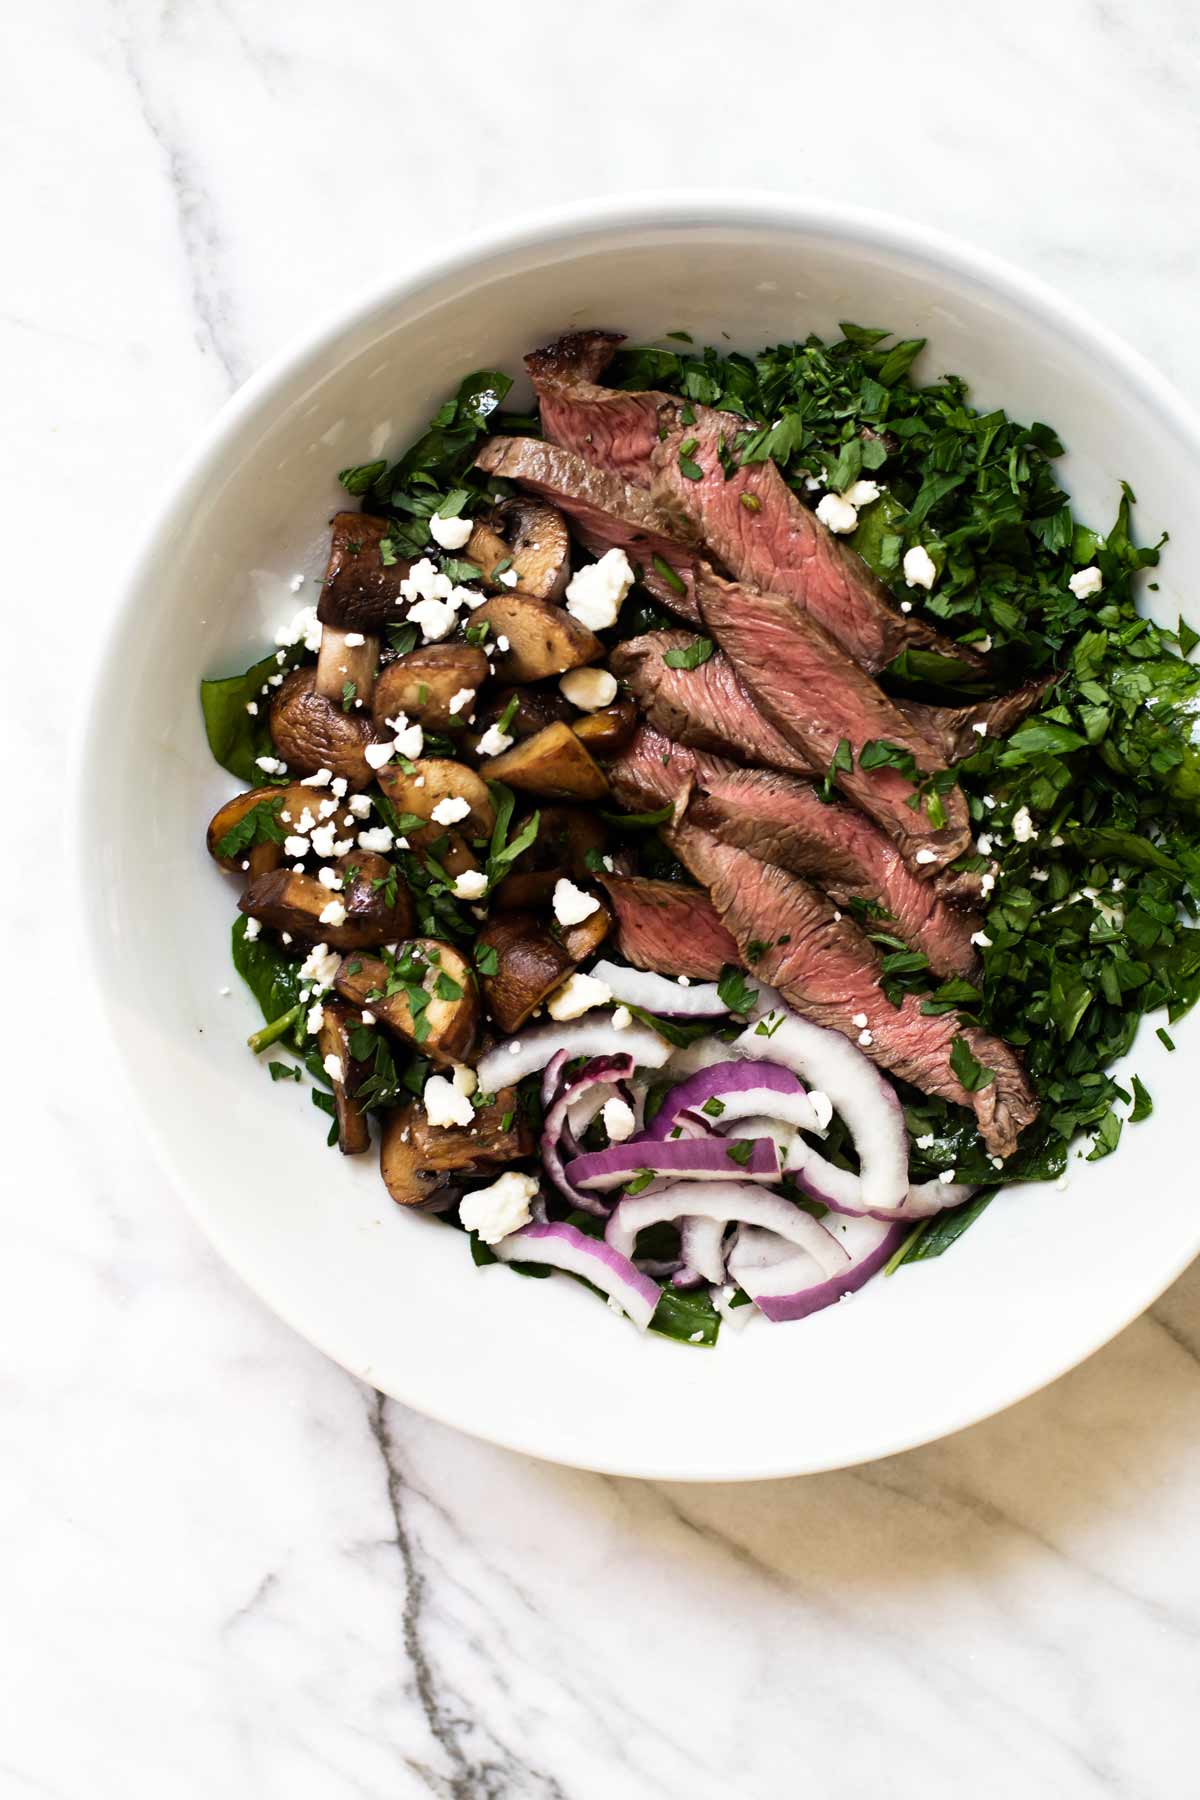 steak salad with mushrooms in a bowl.